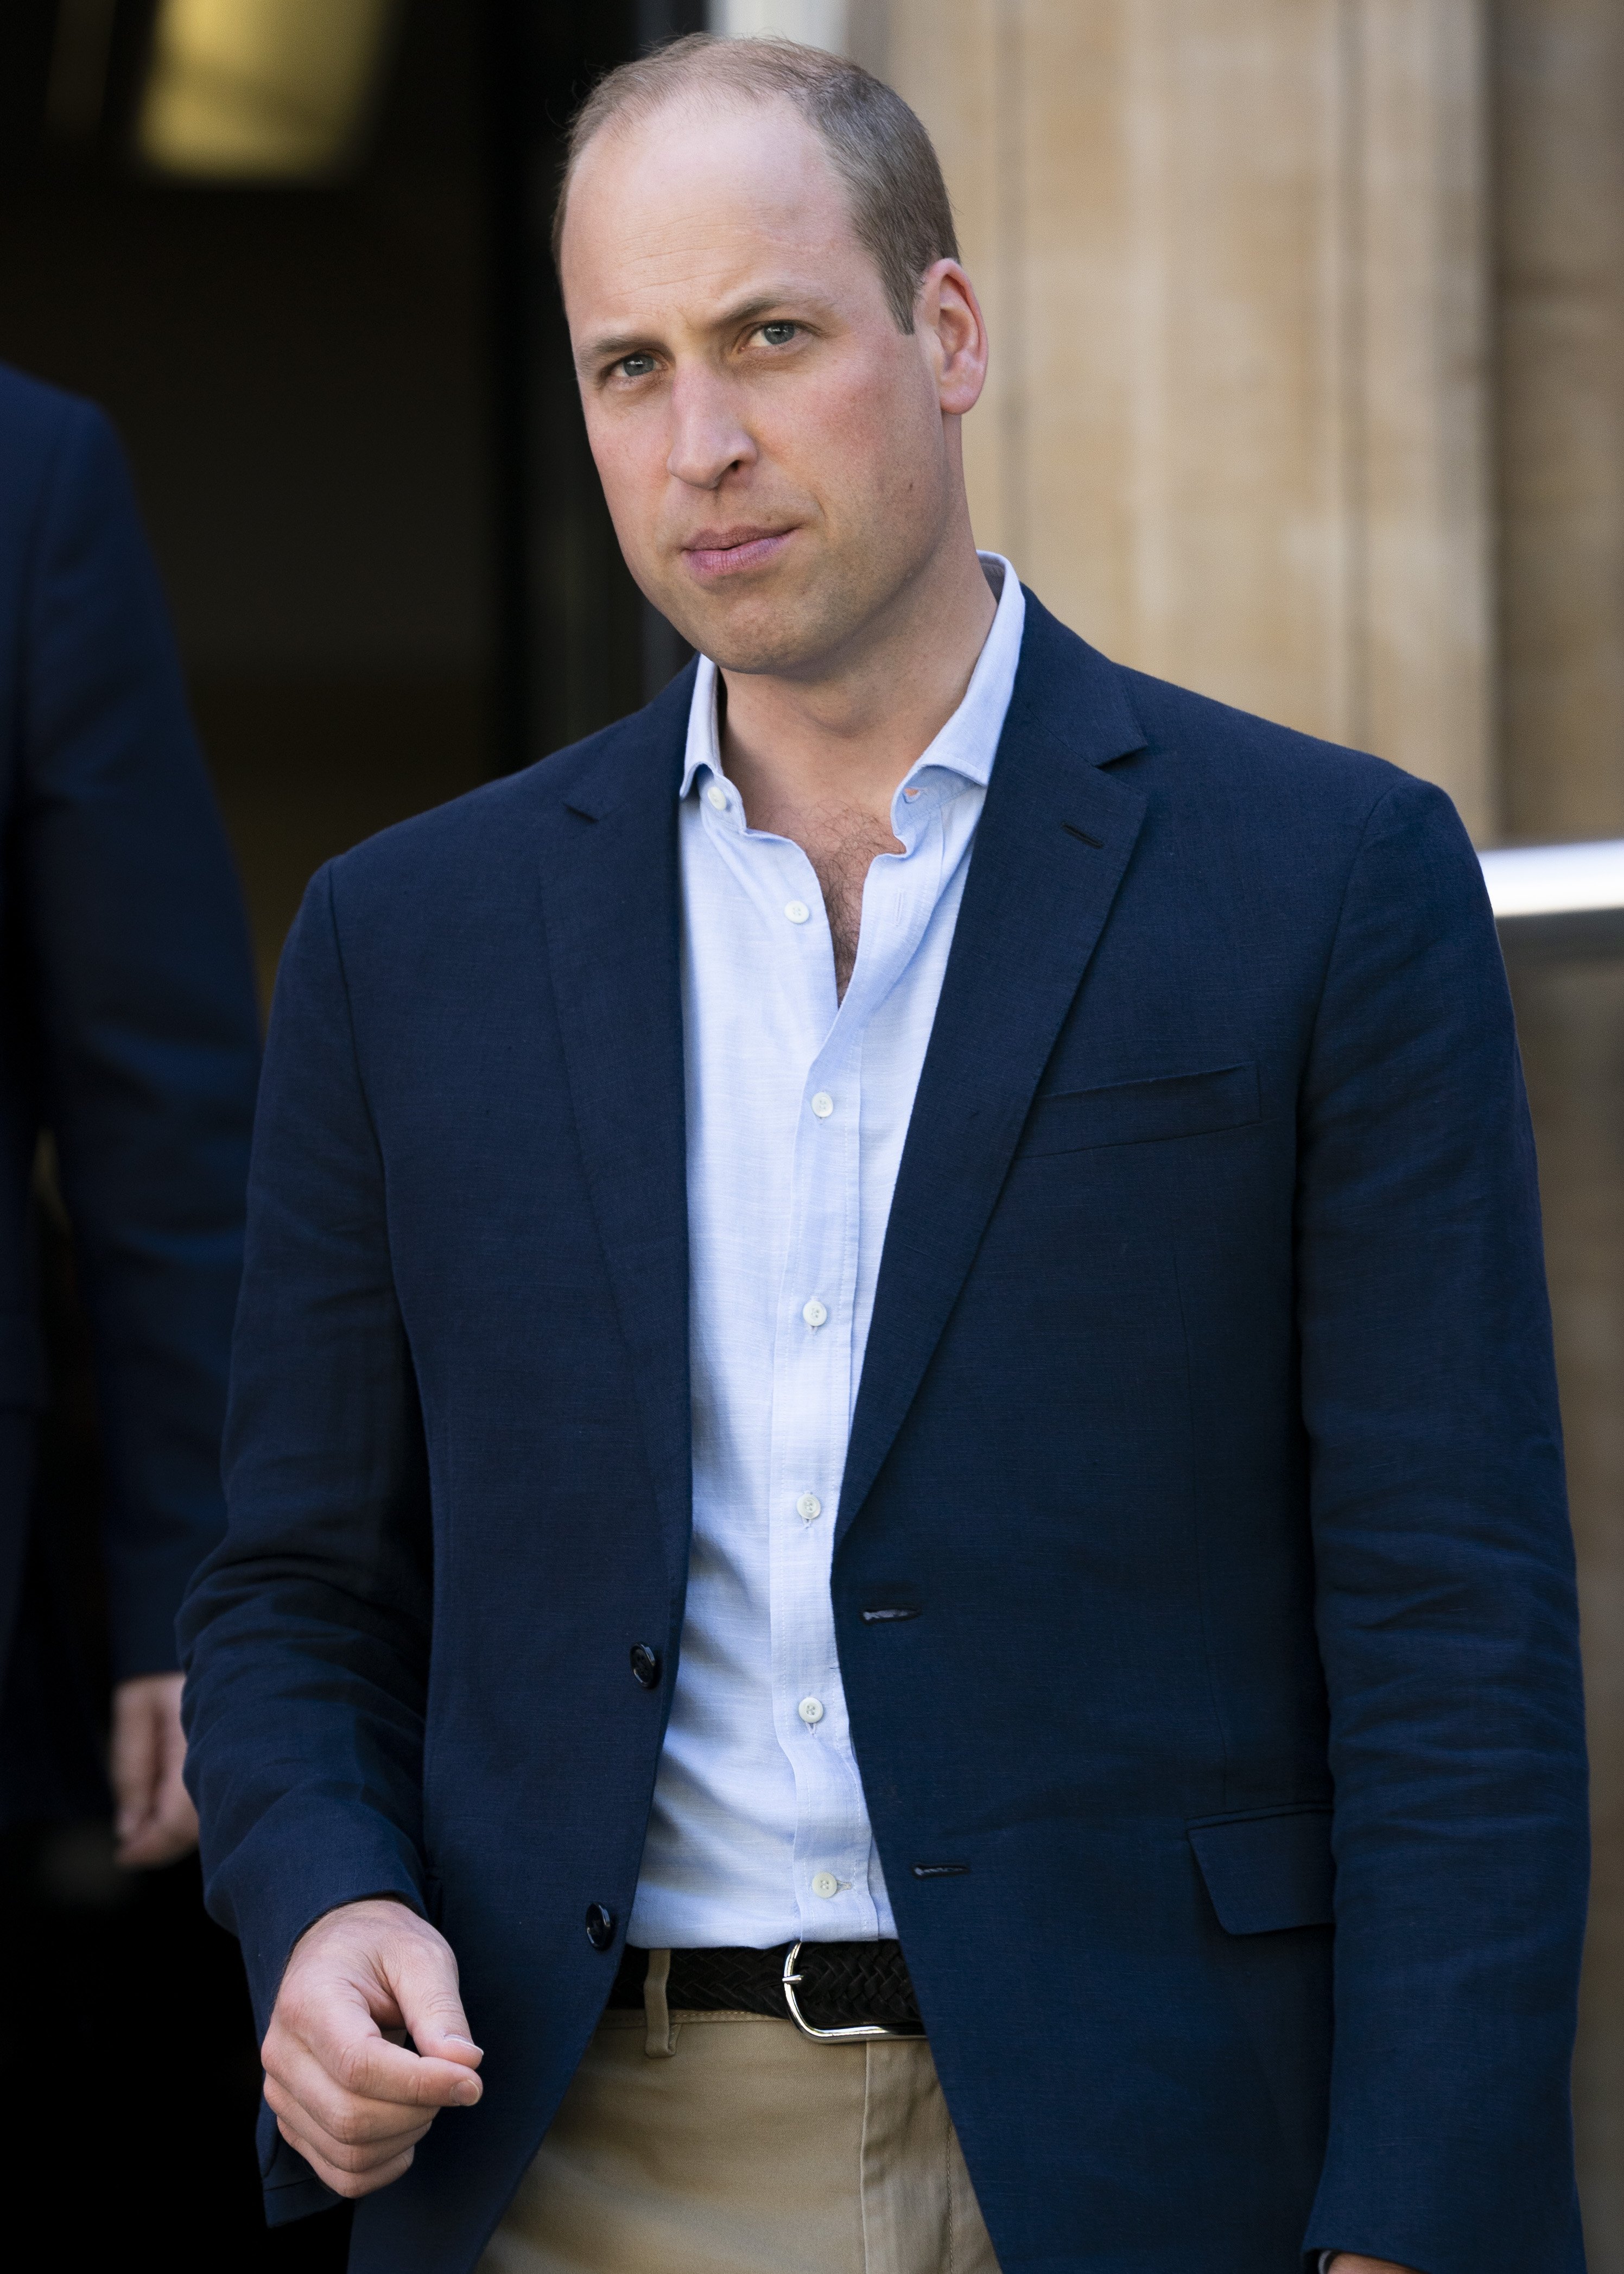 Prince William visits the Royal Marsden in London, United Kingdom on July 4, 2019 | Photo: Getty Images